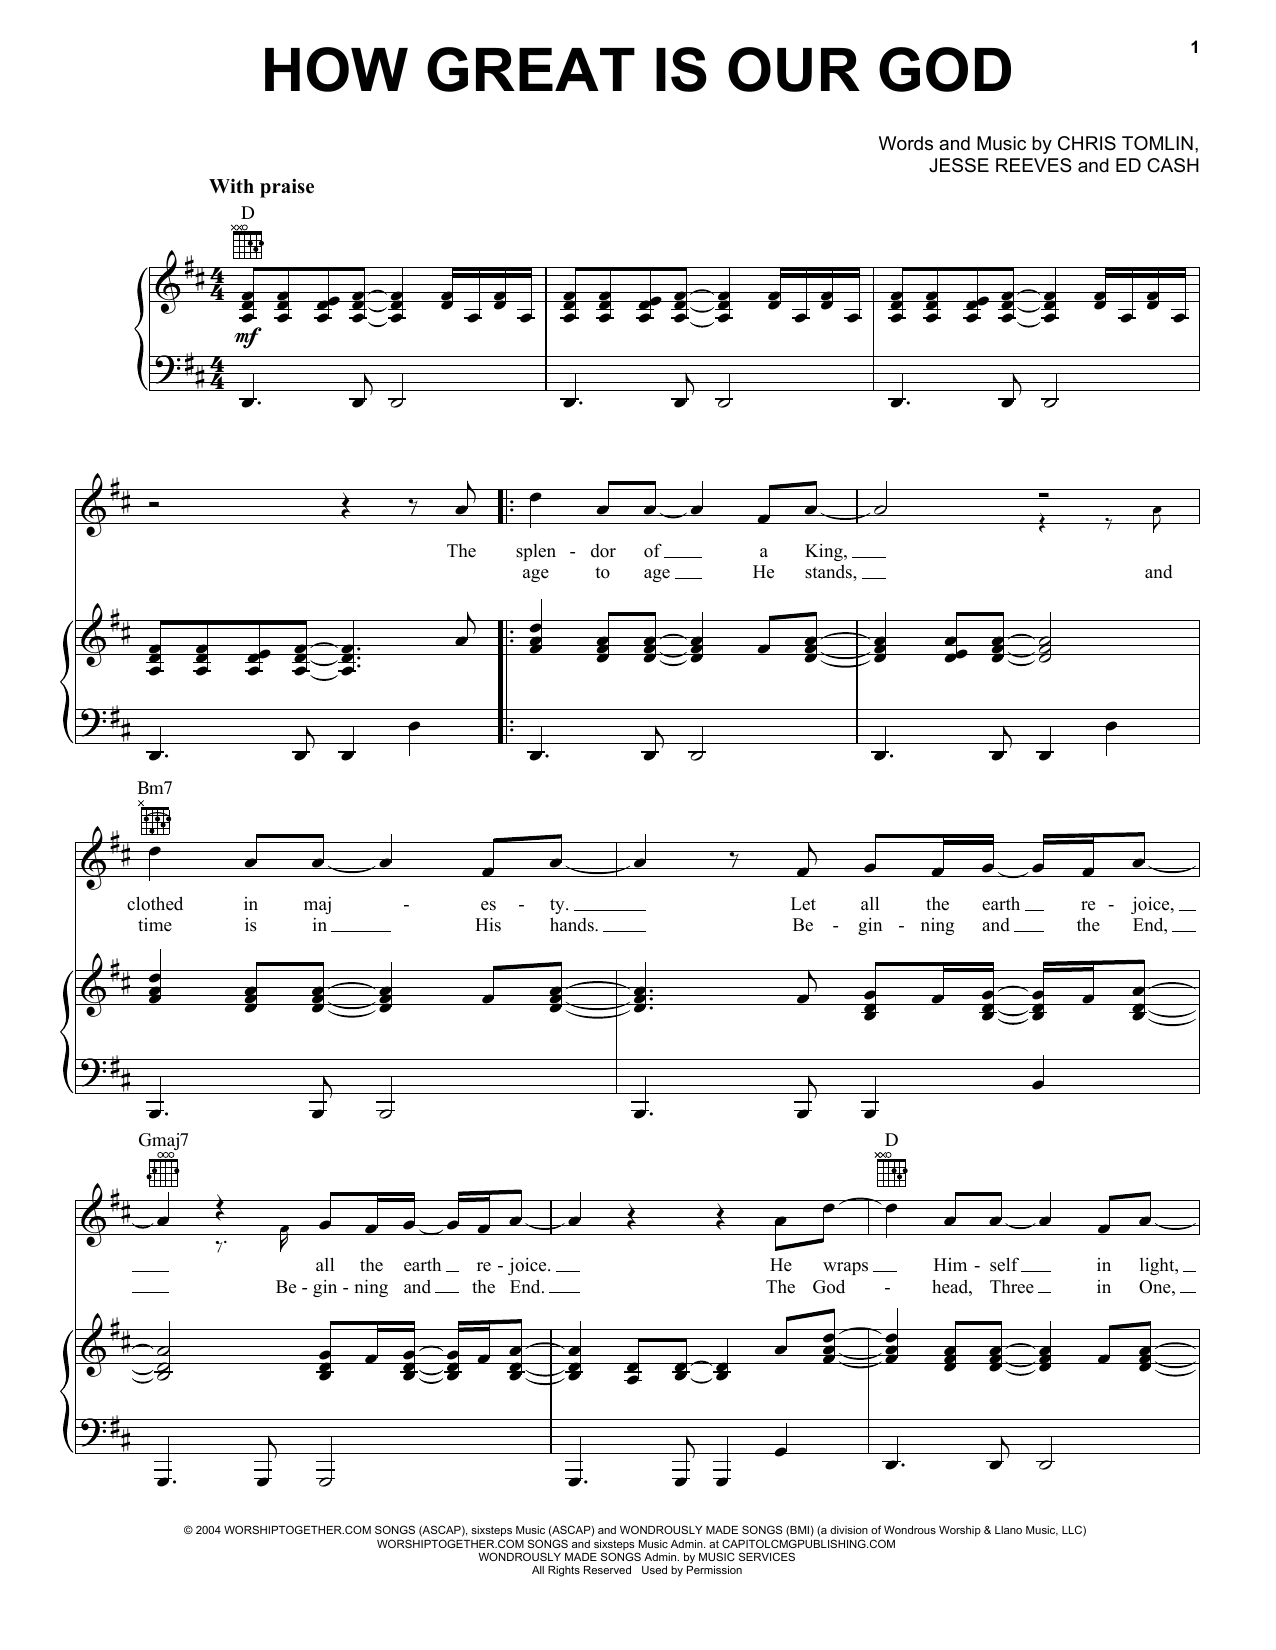 Chris Tomlin How Great Is Our God sheet music notes and chords. Download Printable PDF.